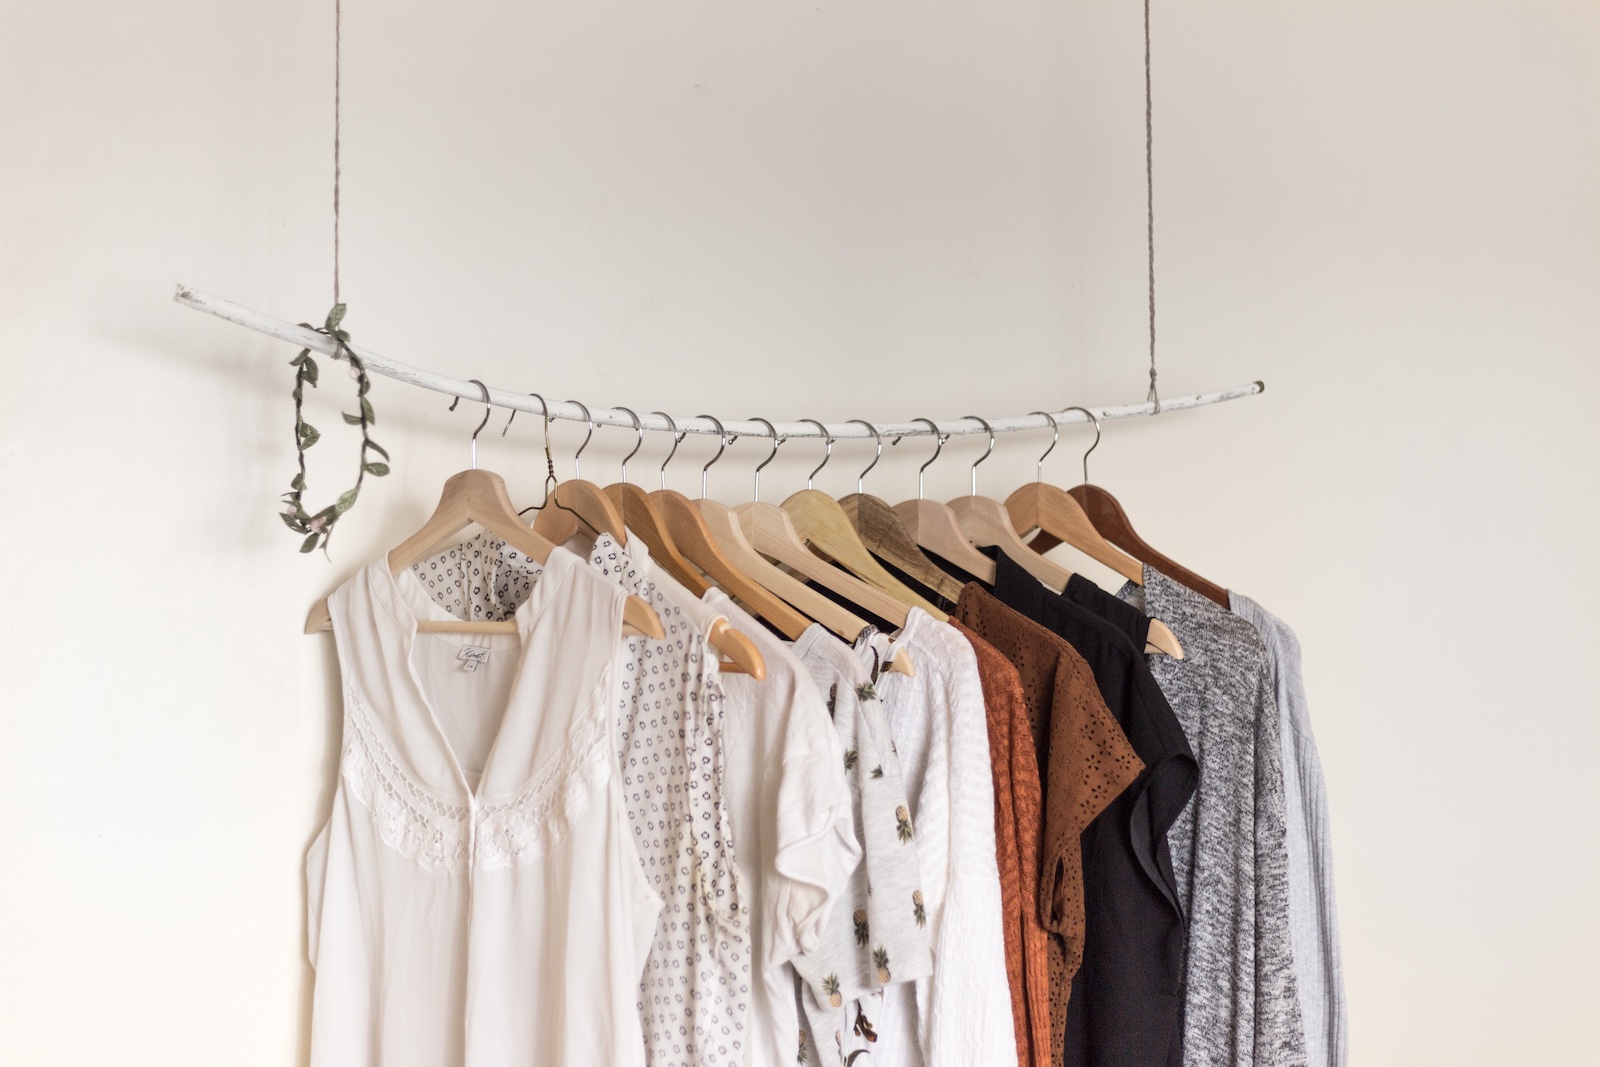 How to Properly Hang Clothes in Your Closet